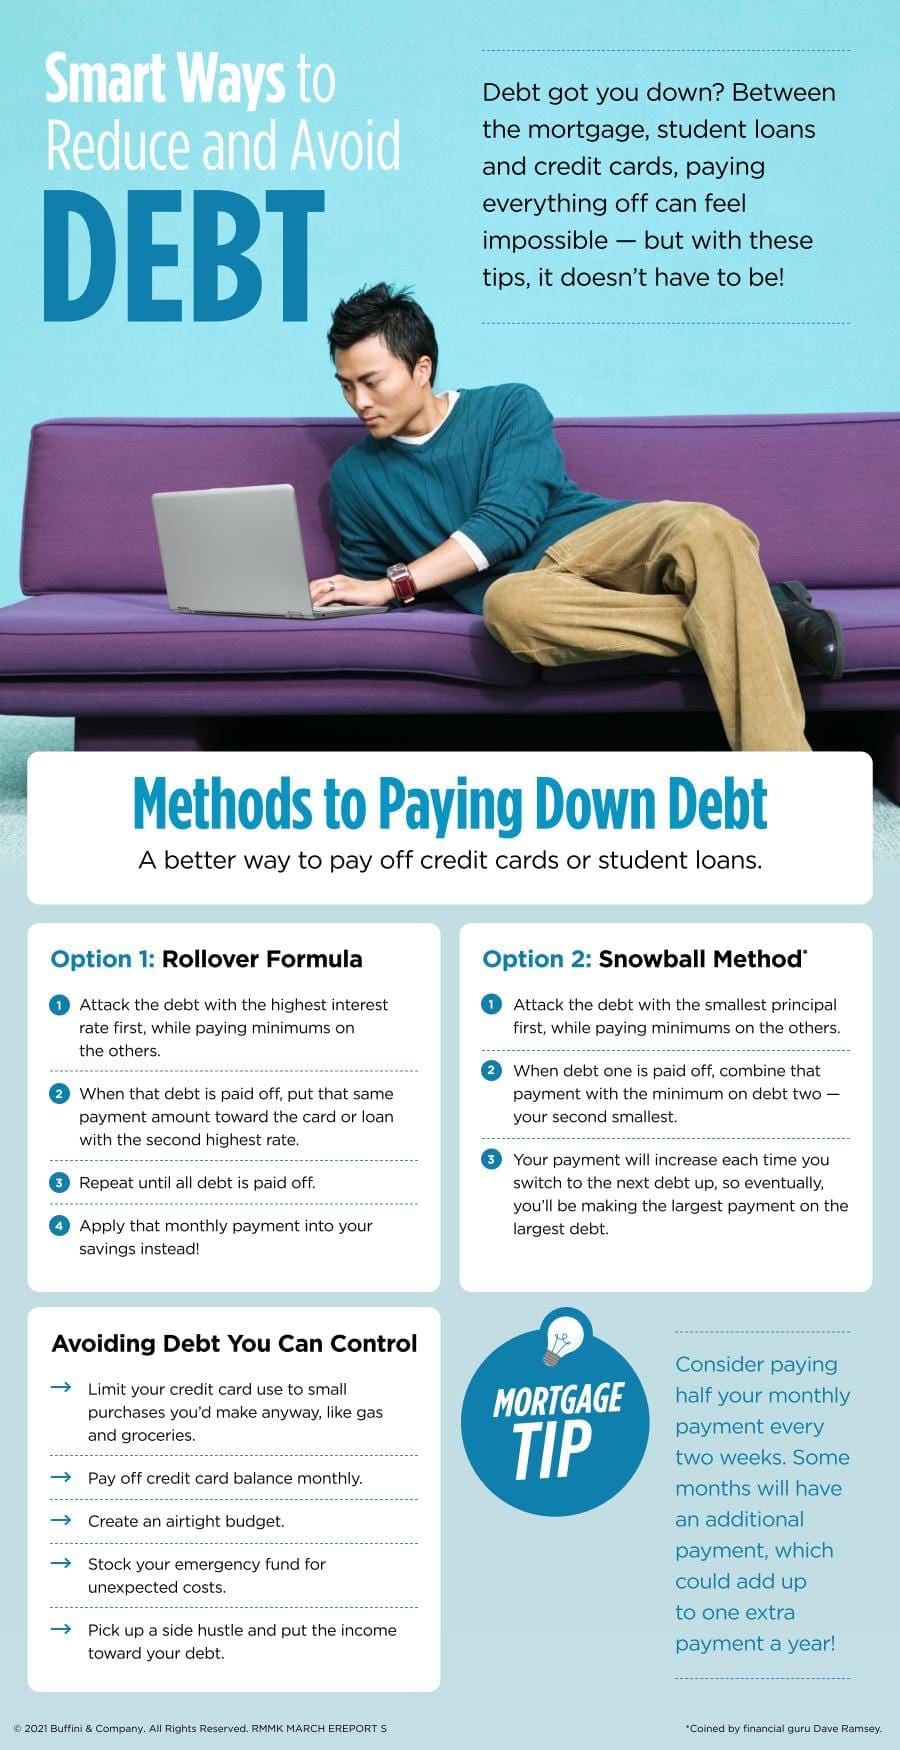 Smart Ways to Reduce and Avoid Debt